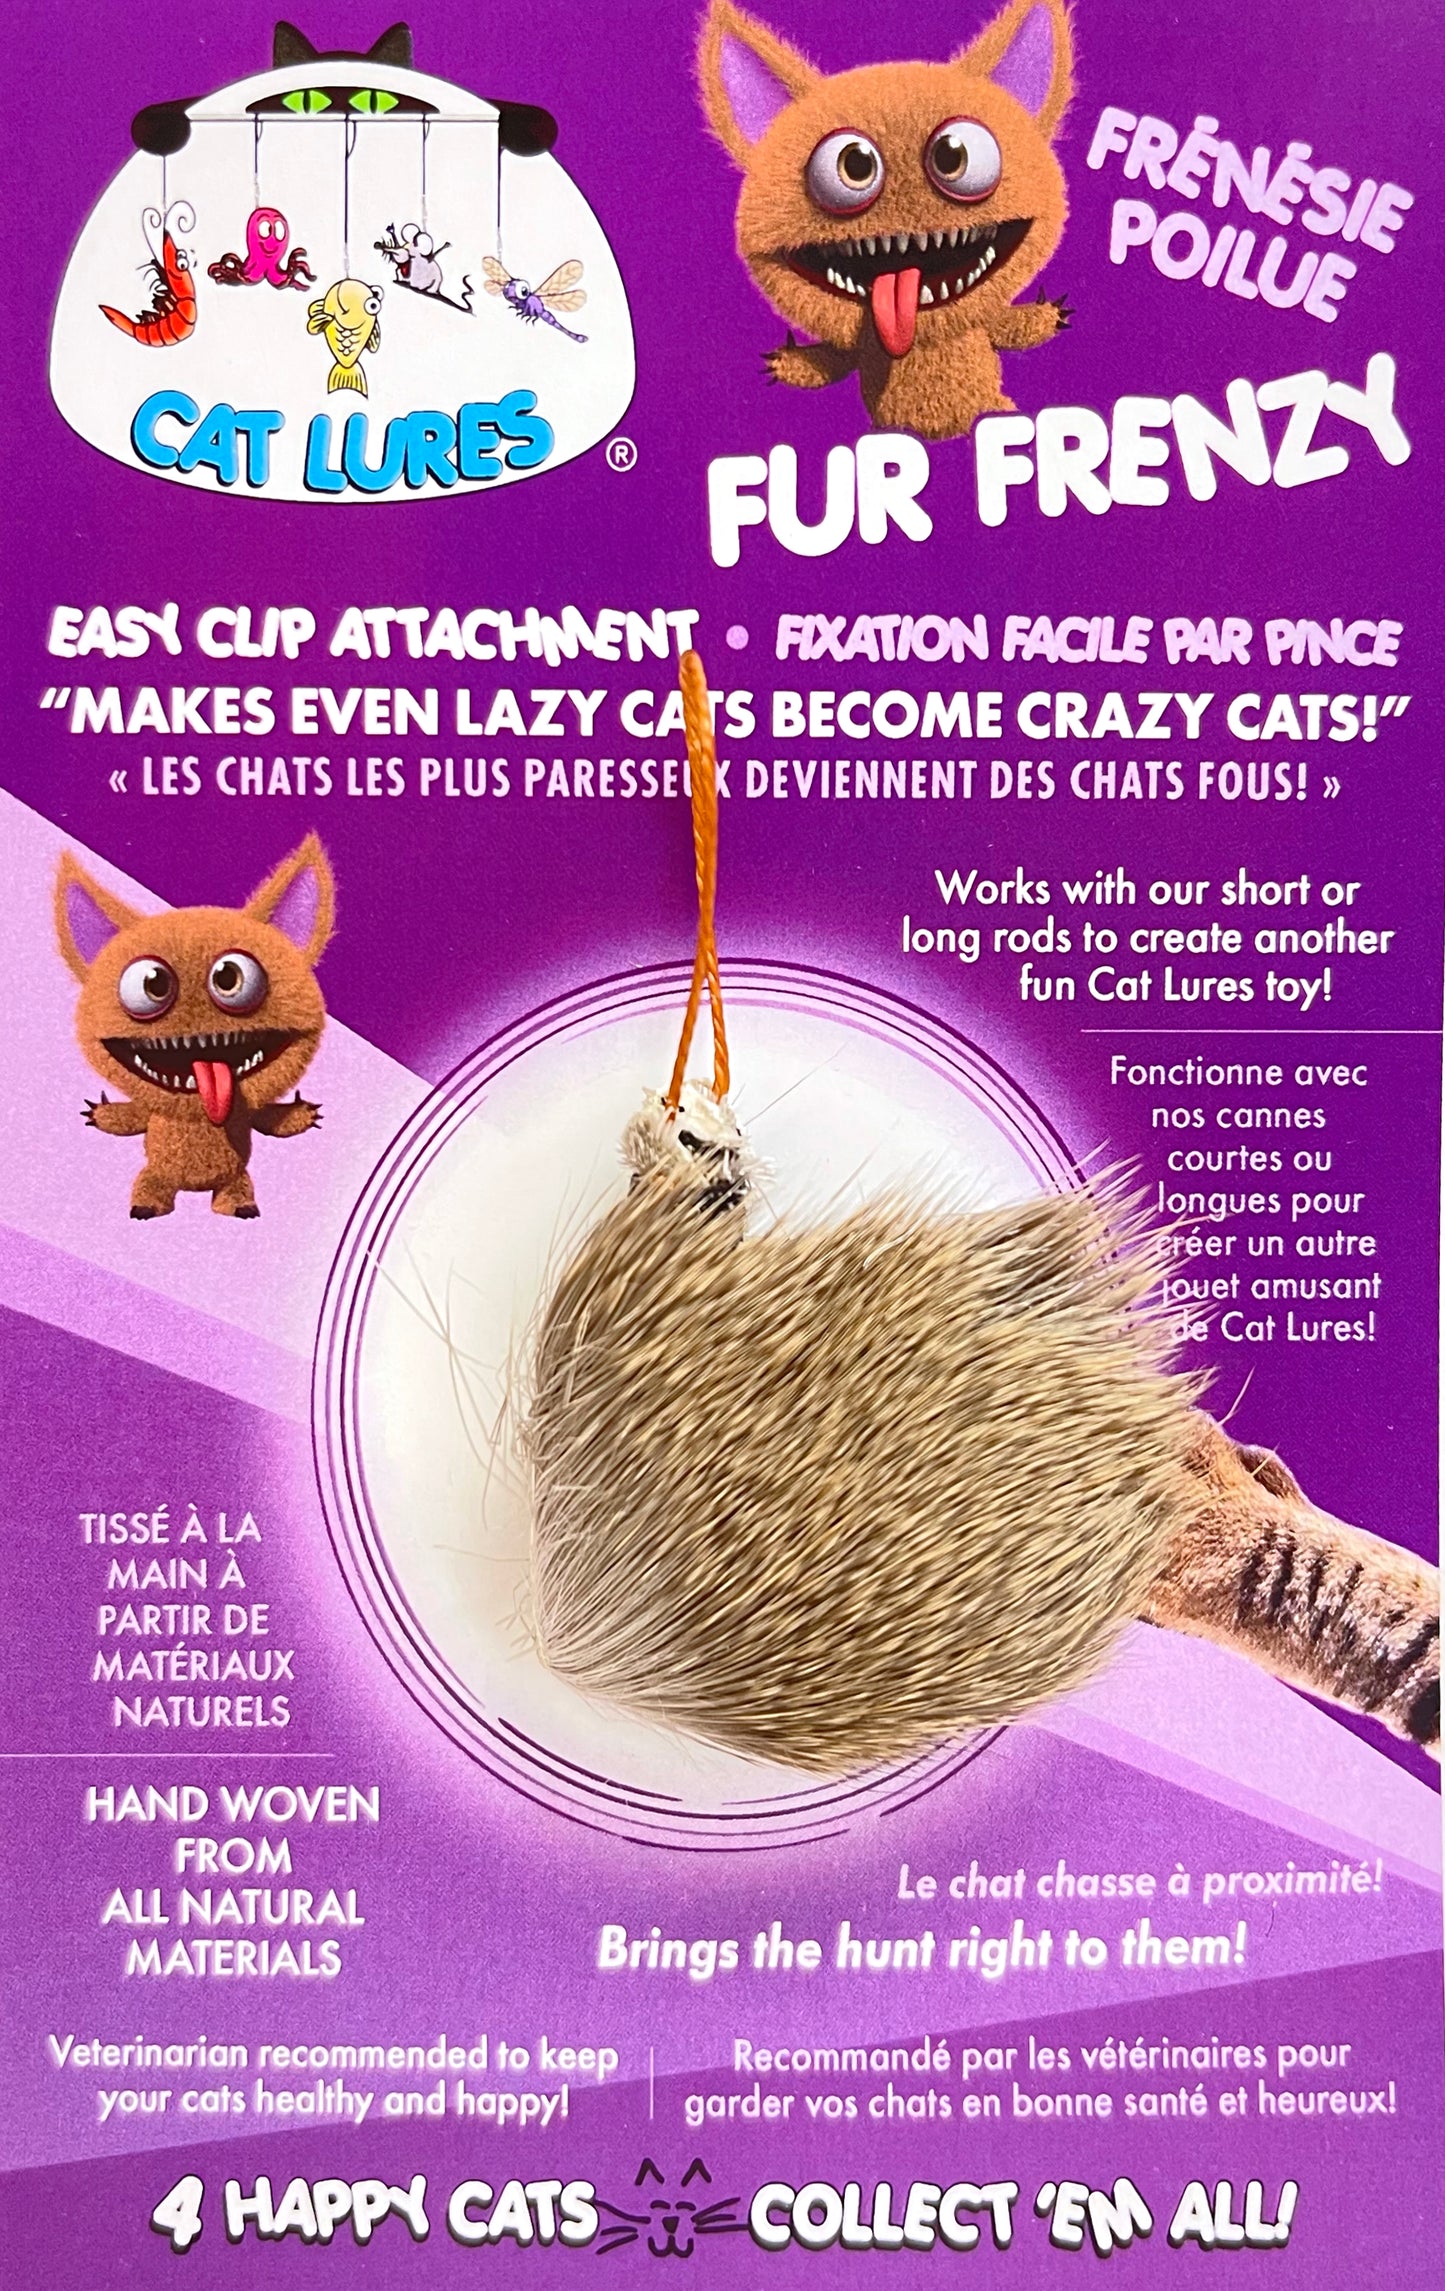 CAT LURES Fur Frenzy Attachment